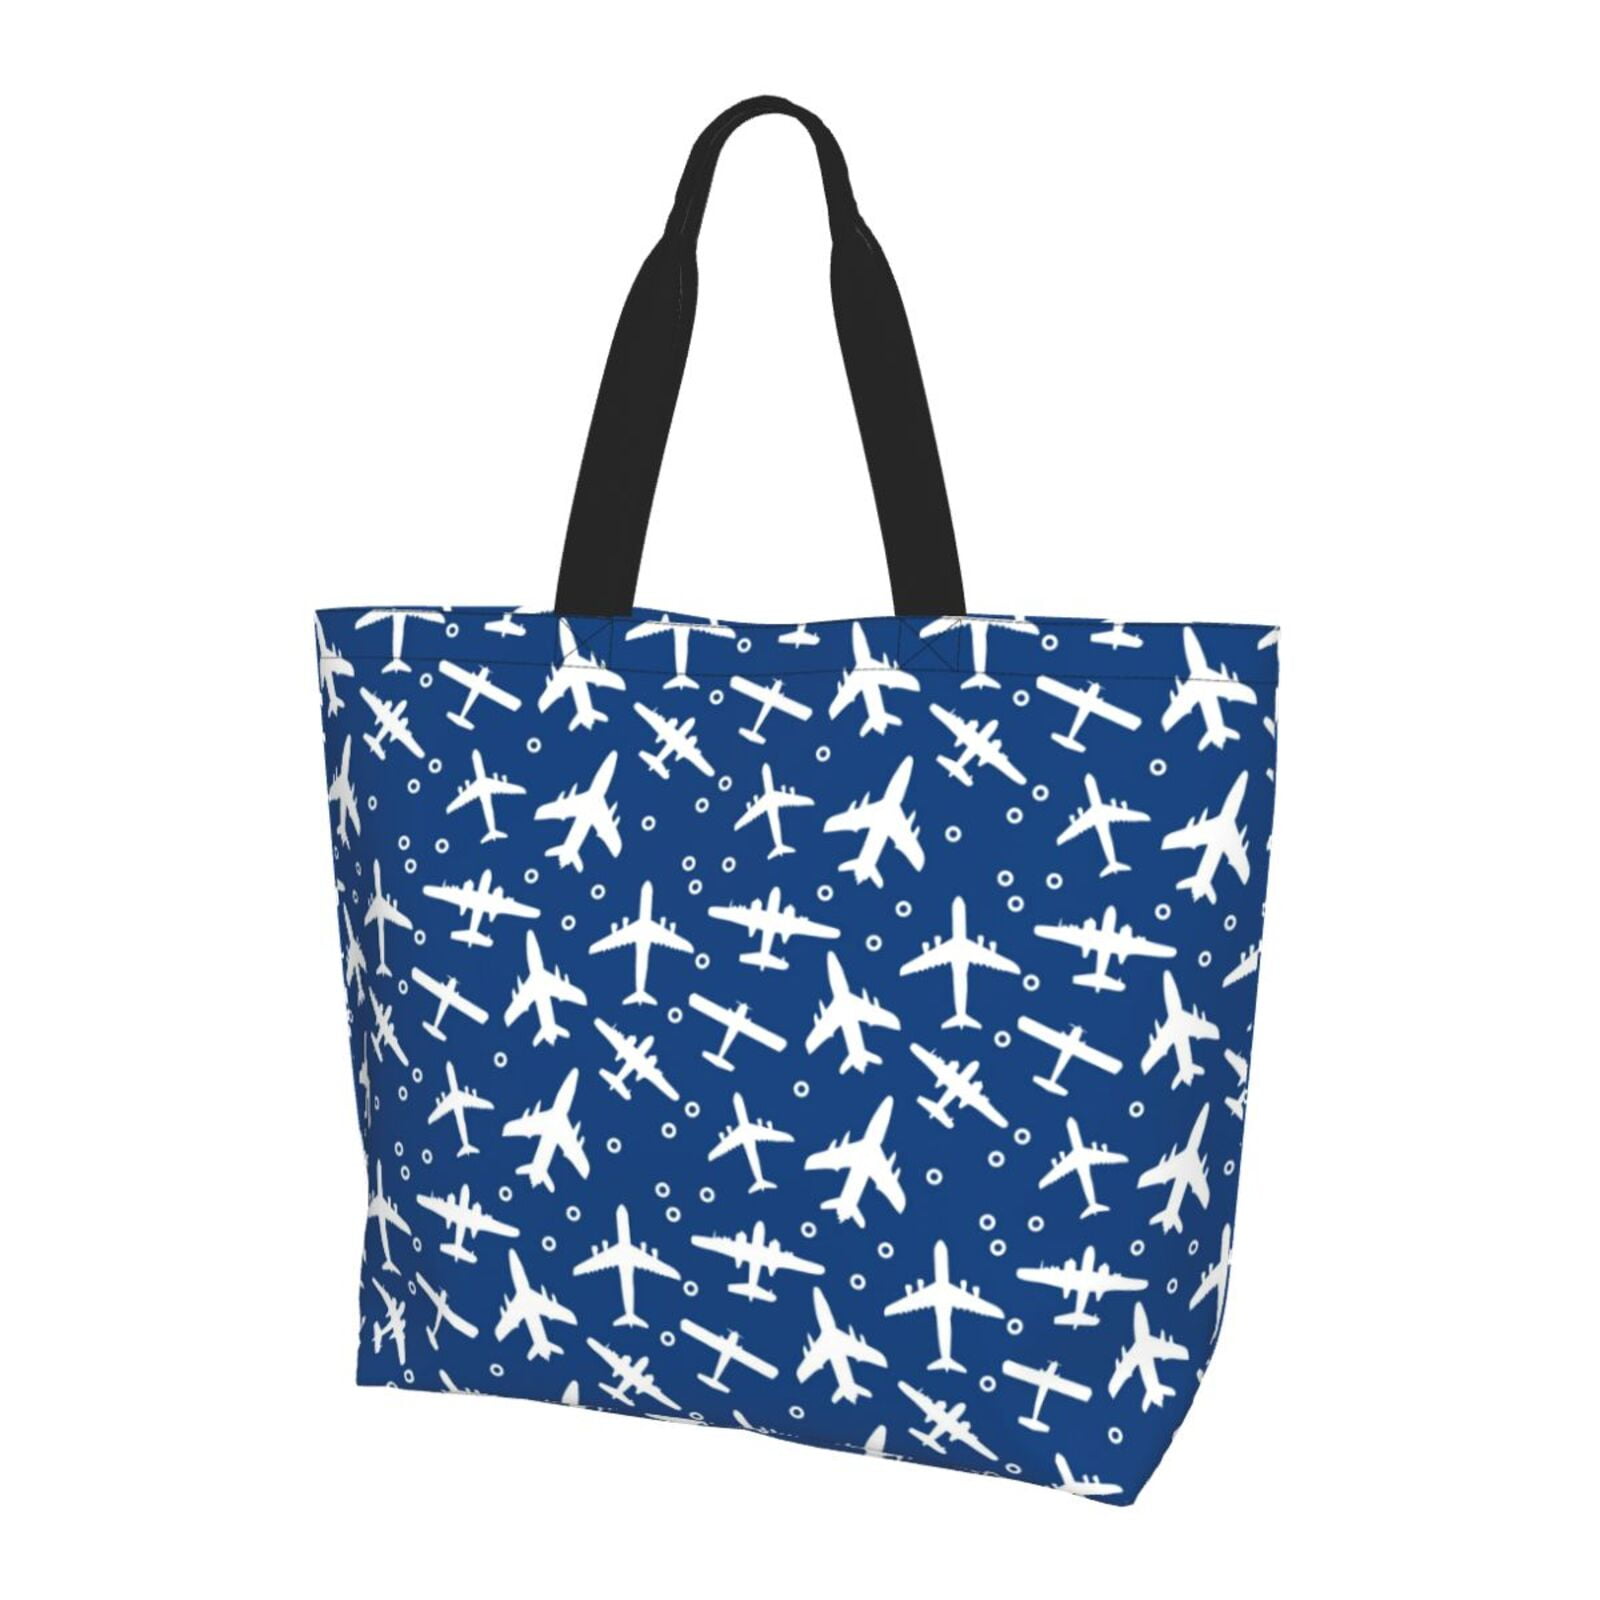 Blue And White Airplane Pattern Tote Bag For Women Lightweight Beach  Shoulder Bag Large Handbags For Work School Travel